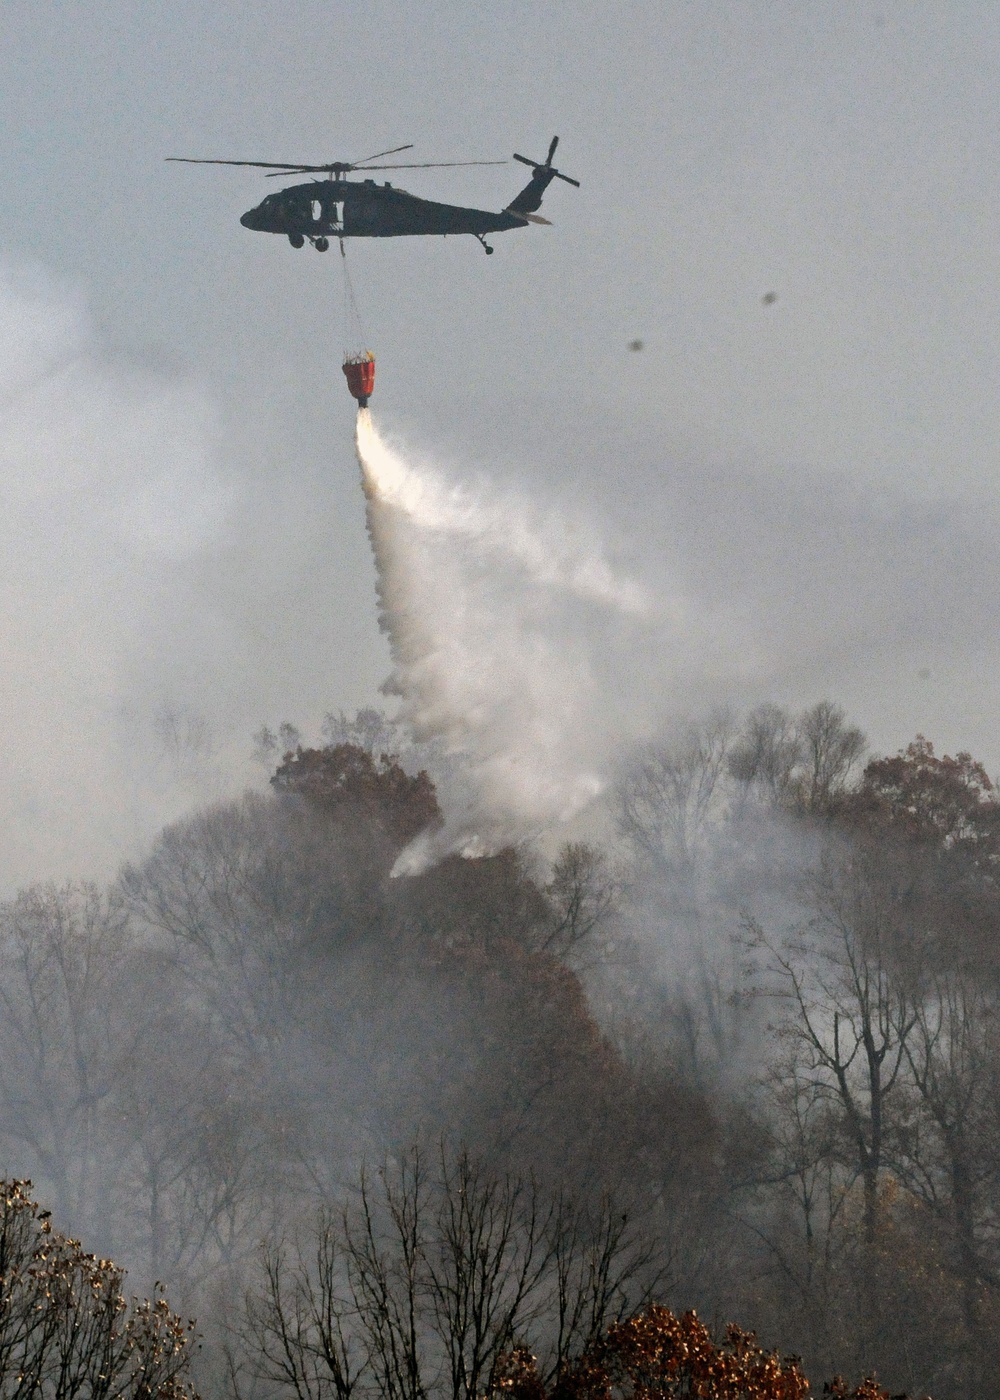 Camp Atterbury Douses Flames on Range